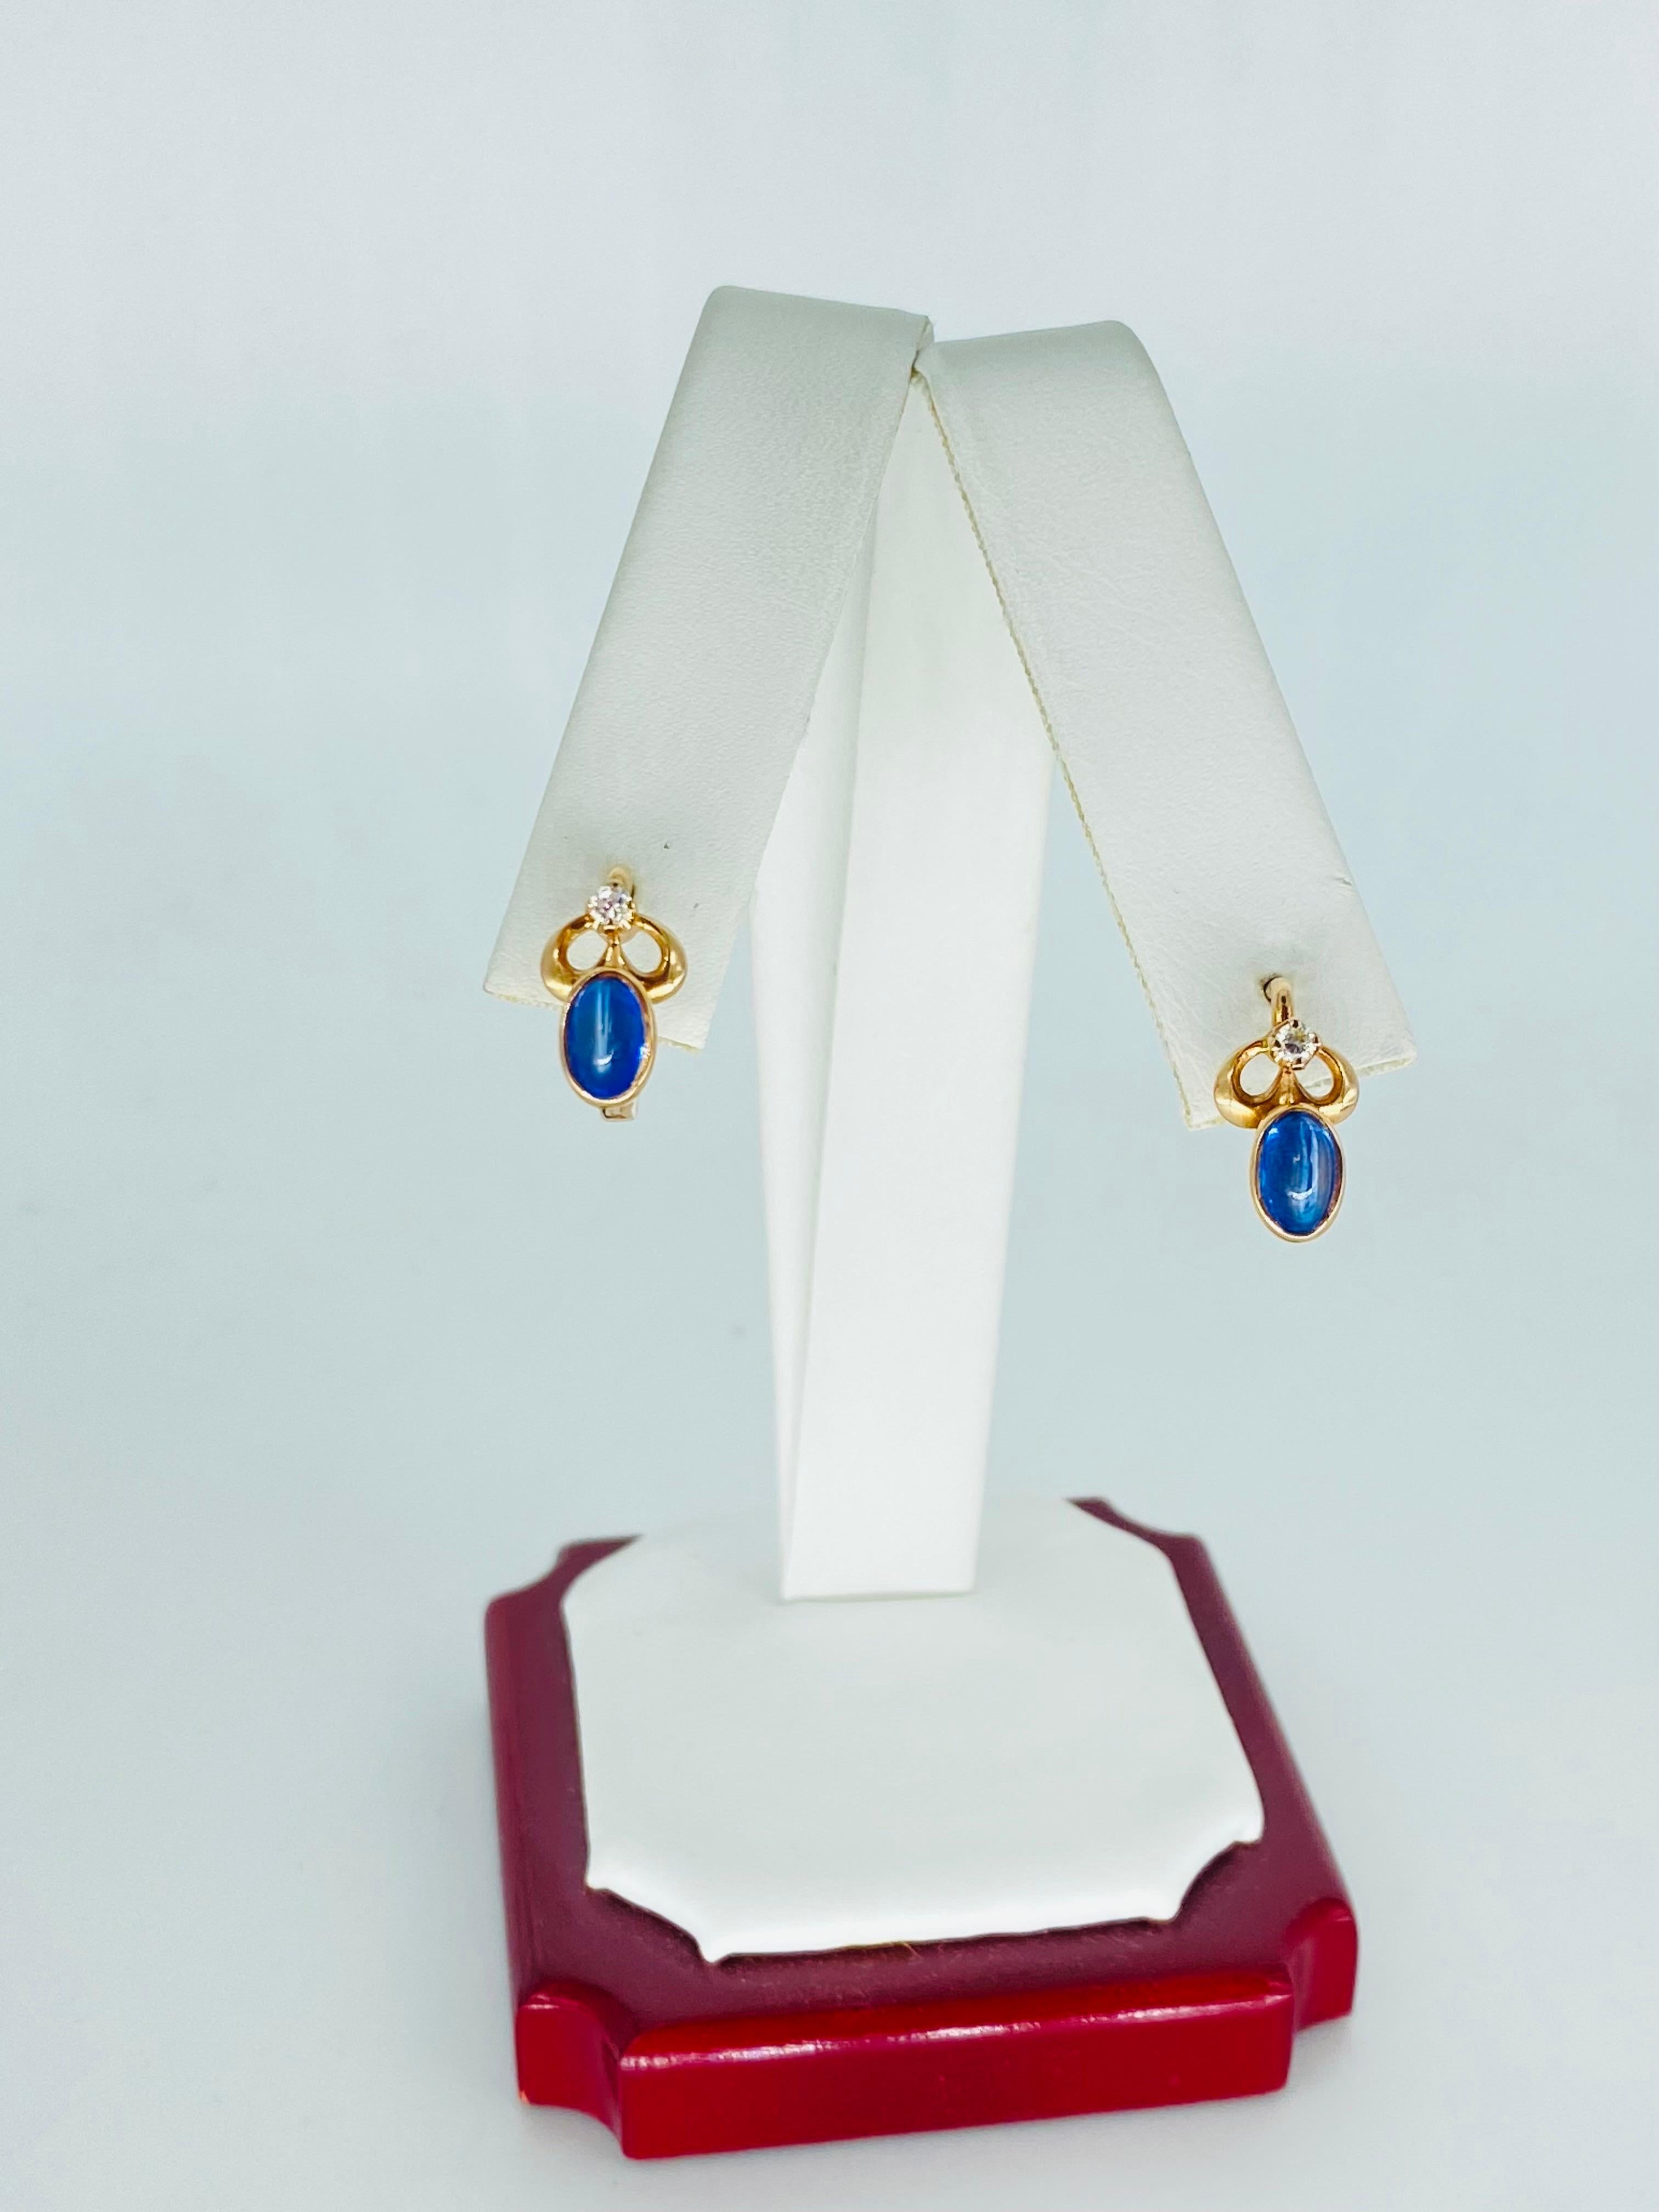 Retro 1.56 Carat Sapphire Cabochon Bezel Set Earrings Russian Gold 14k. The ring is stamped for purity and maker. The earrings feature blue sapphire cabochon cut that measure approx 0.78 carat each by formula for a total of 1.56 carat. The diamonds